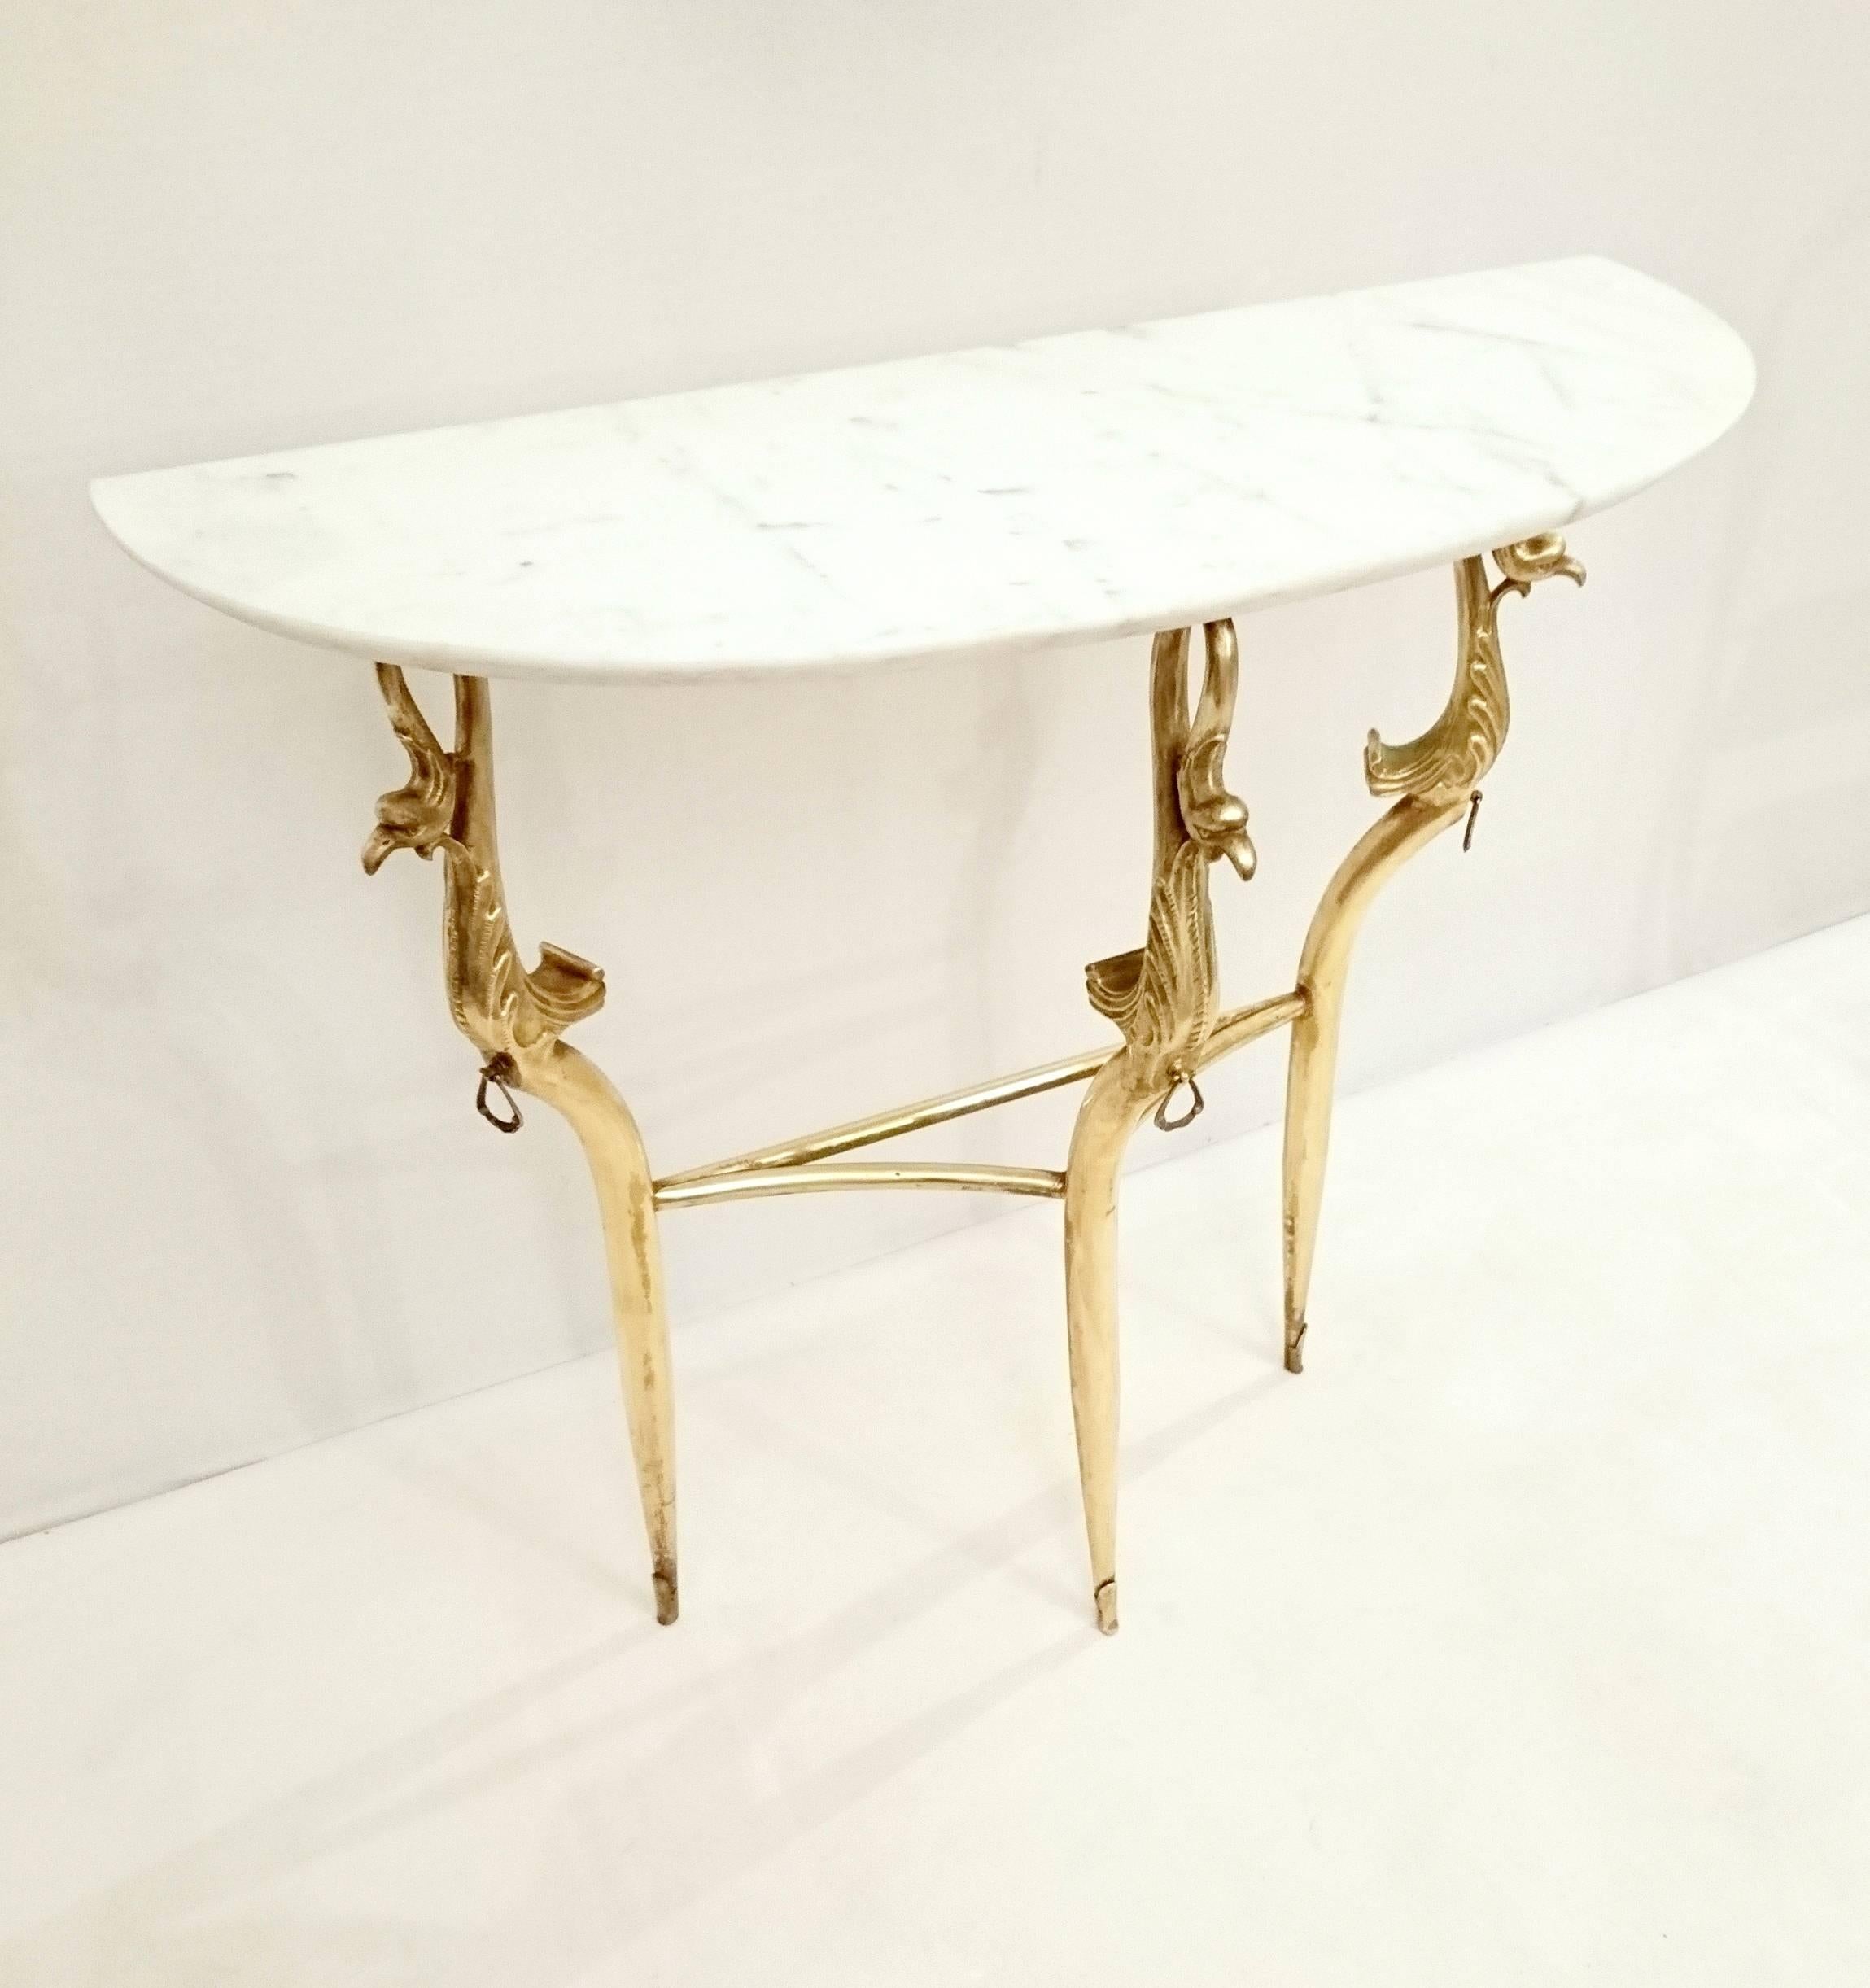 Italian console table in Carrara marble and brass made in the 1950s in Empire style.